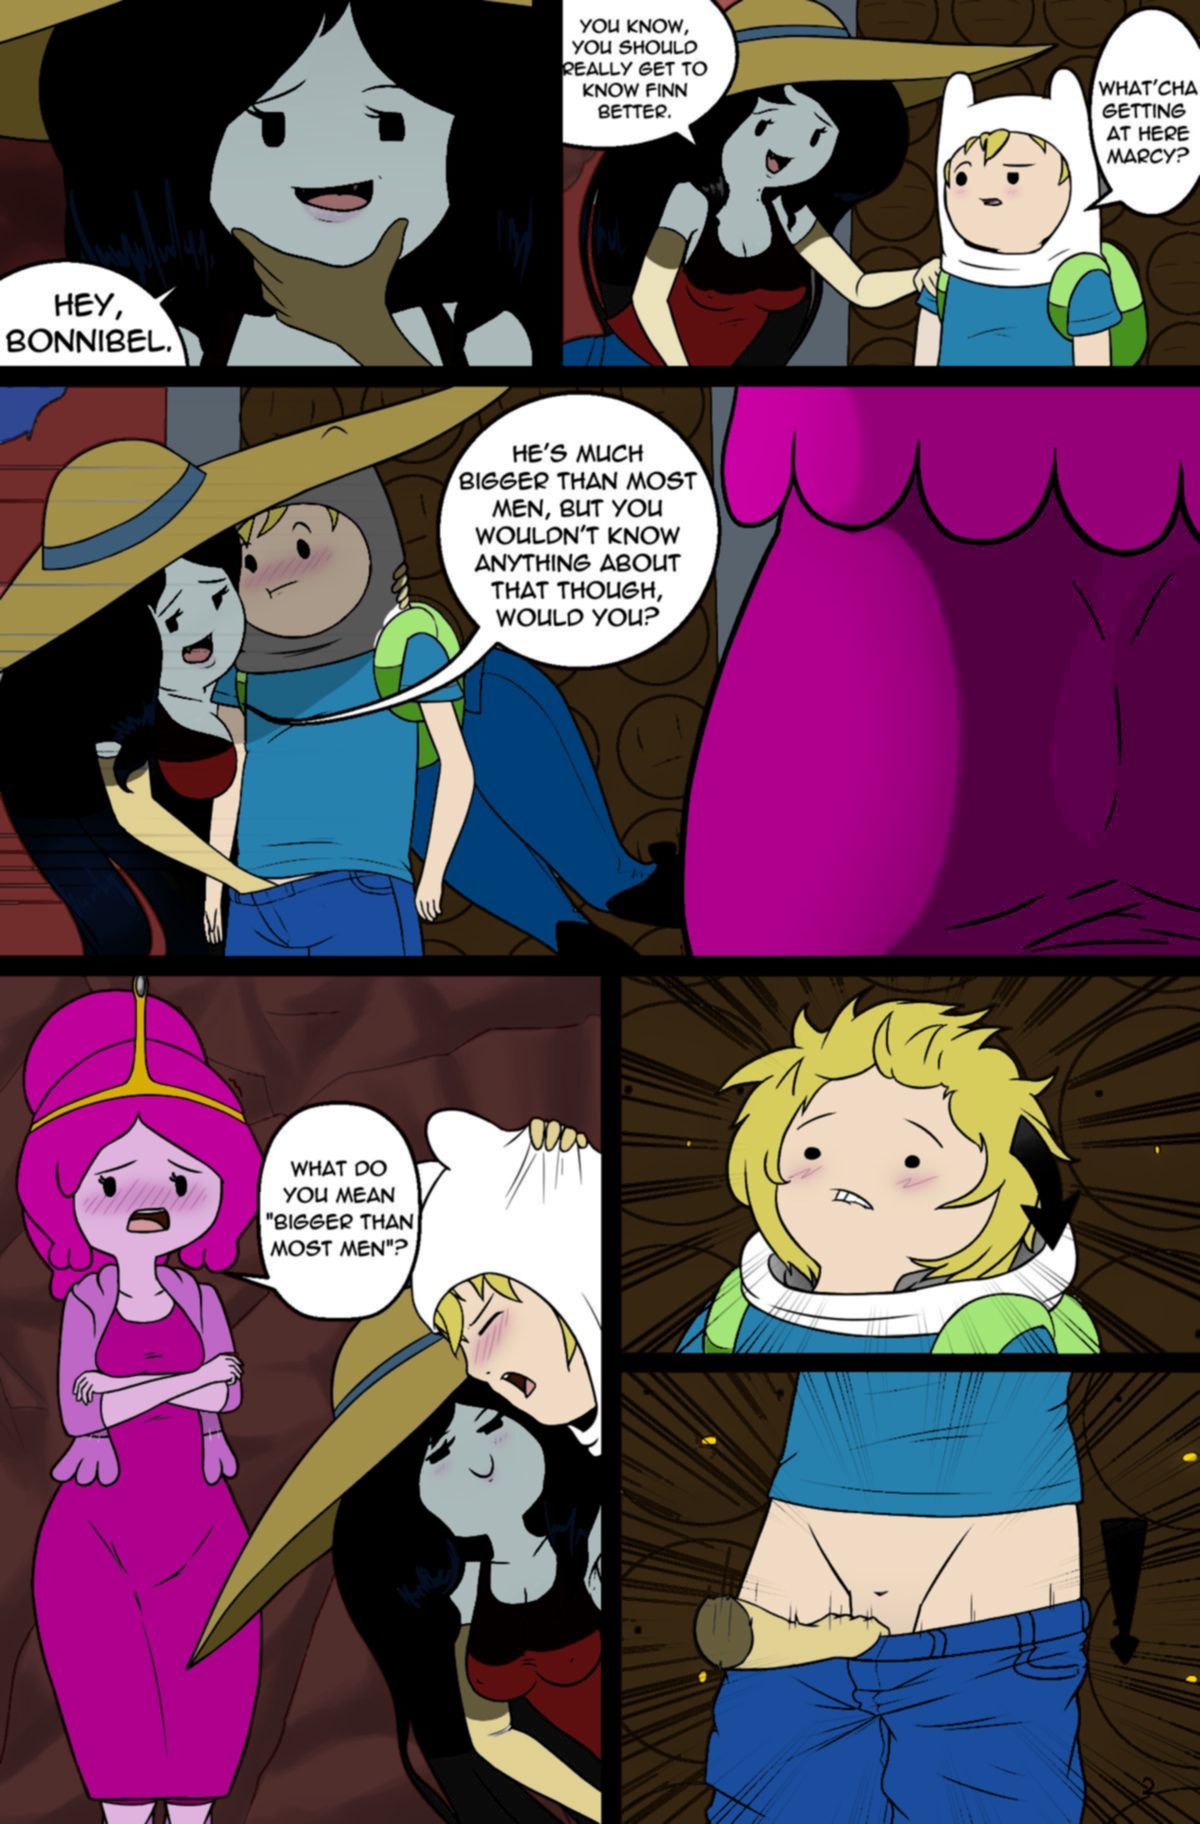 [cubbychambers] MisAdventure Time Issue #2 - What Was Missing (Adventure Time) color